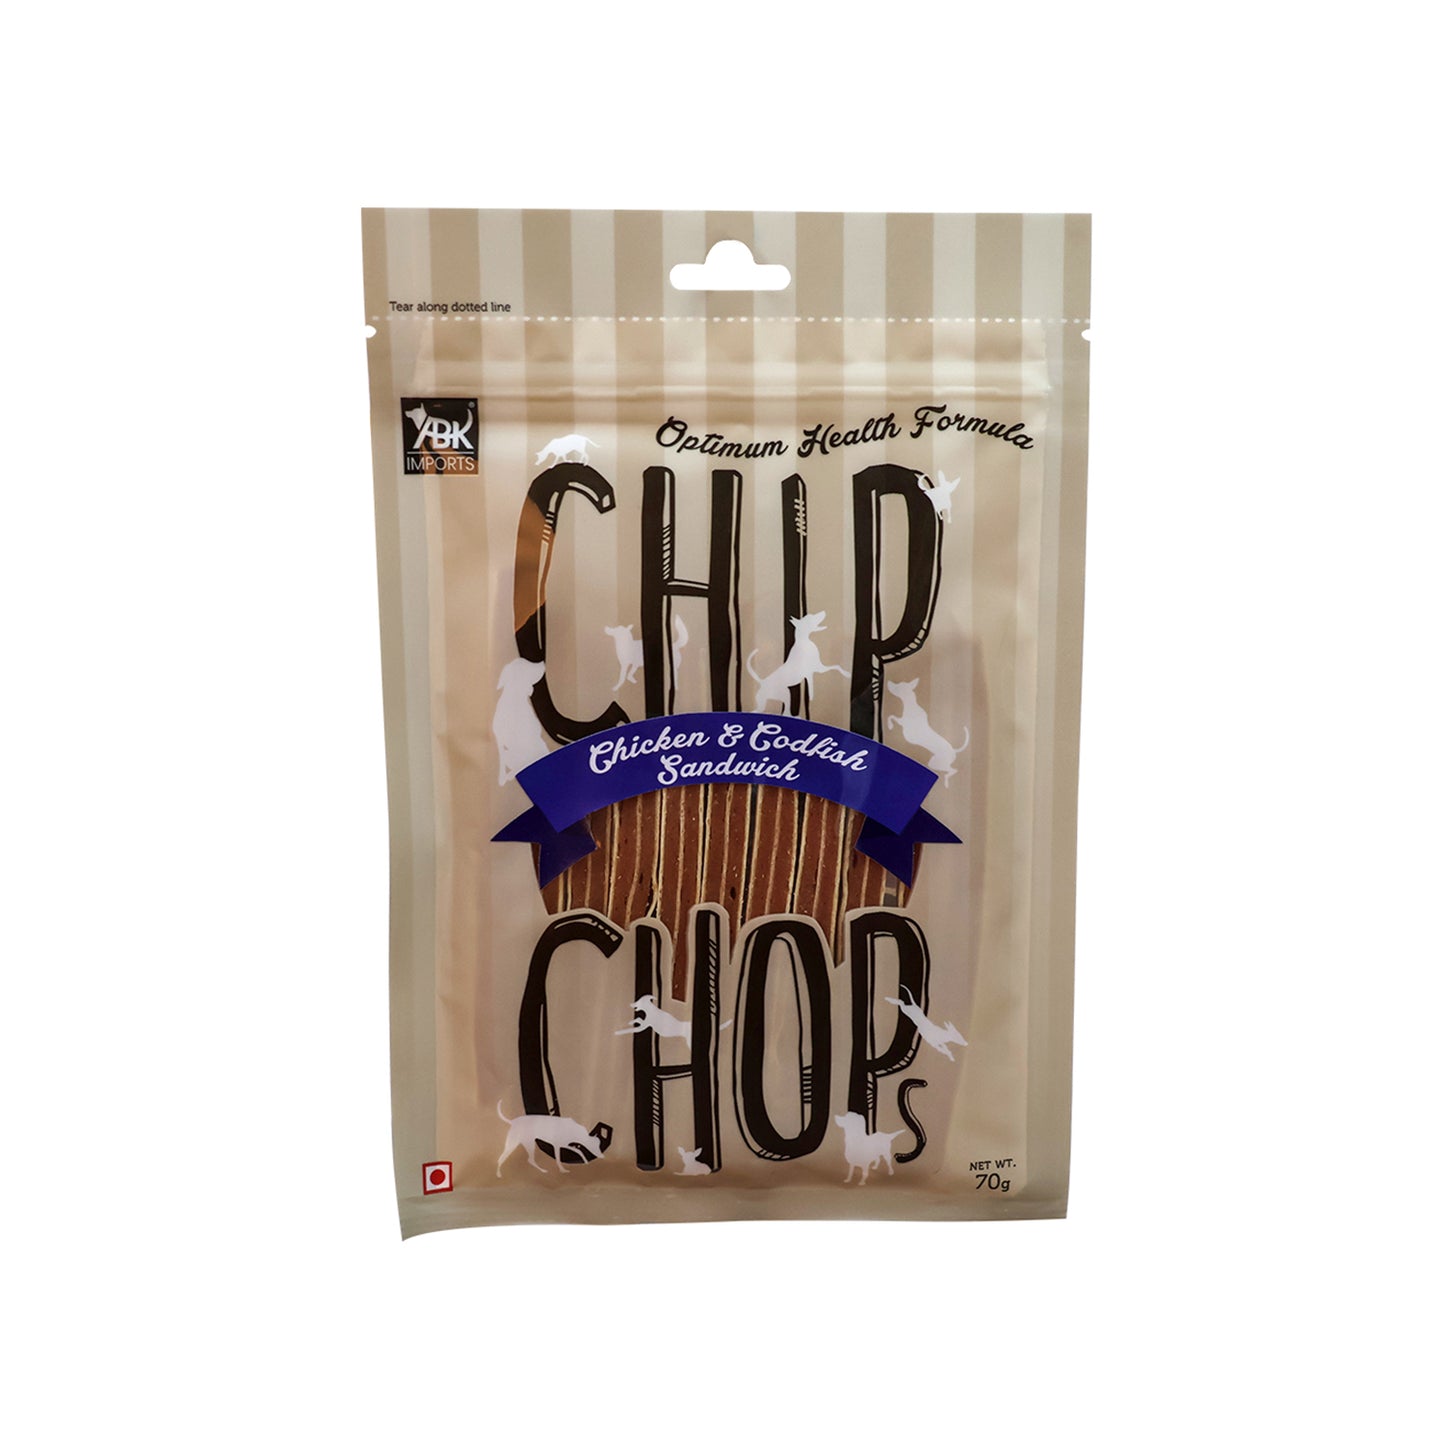 Chip Chops - Chicken and Codfish Sandwich For Dogs